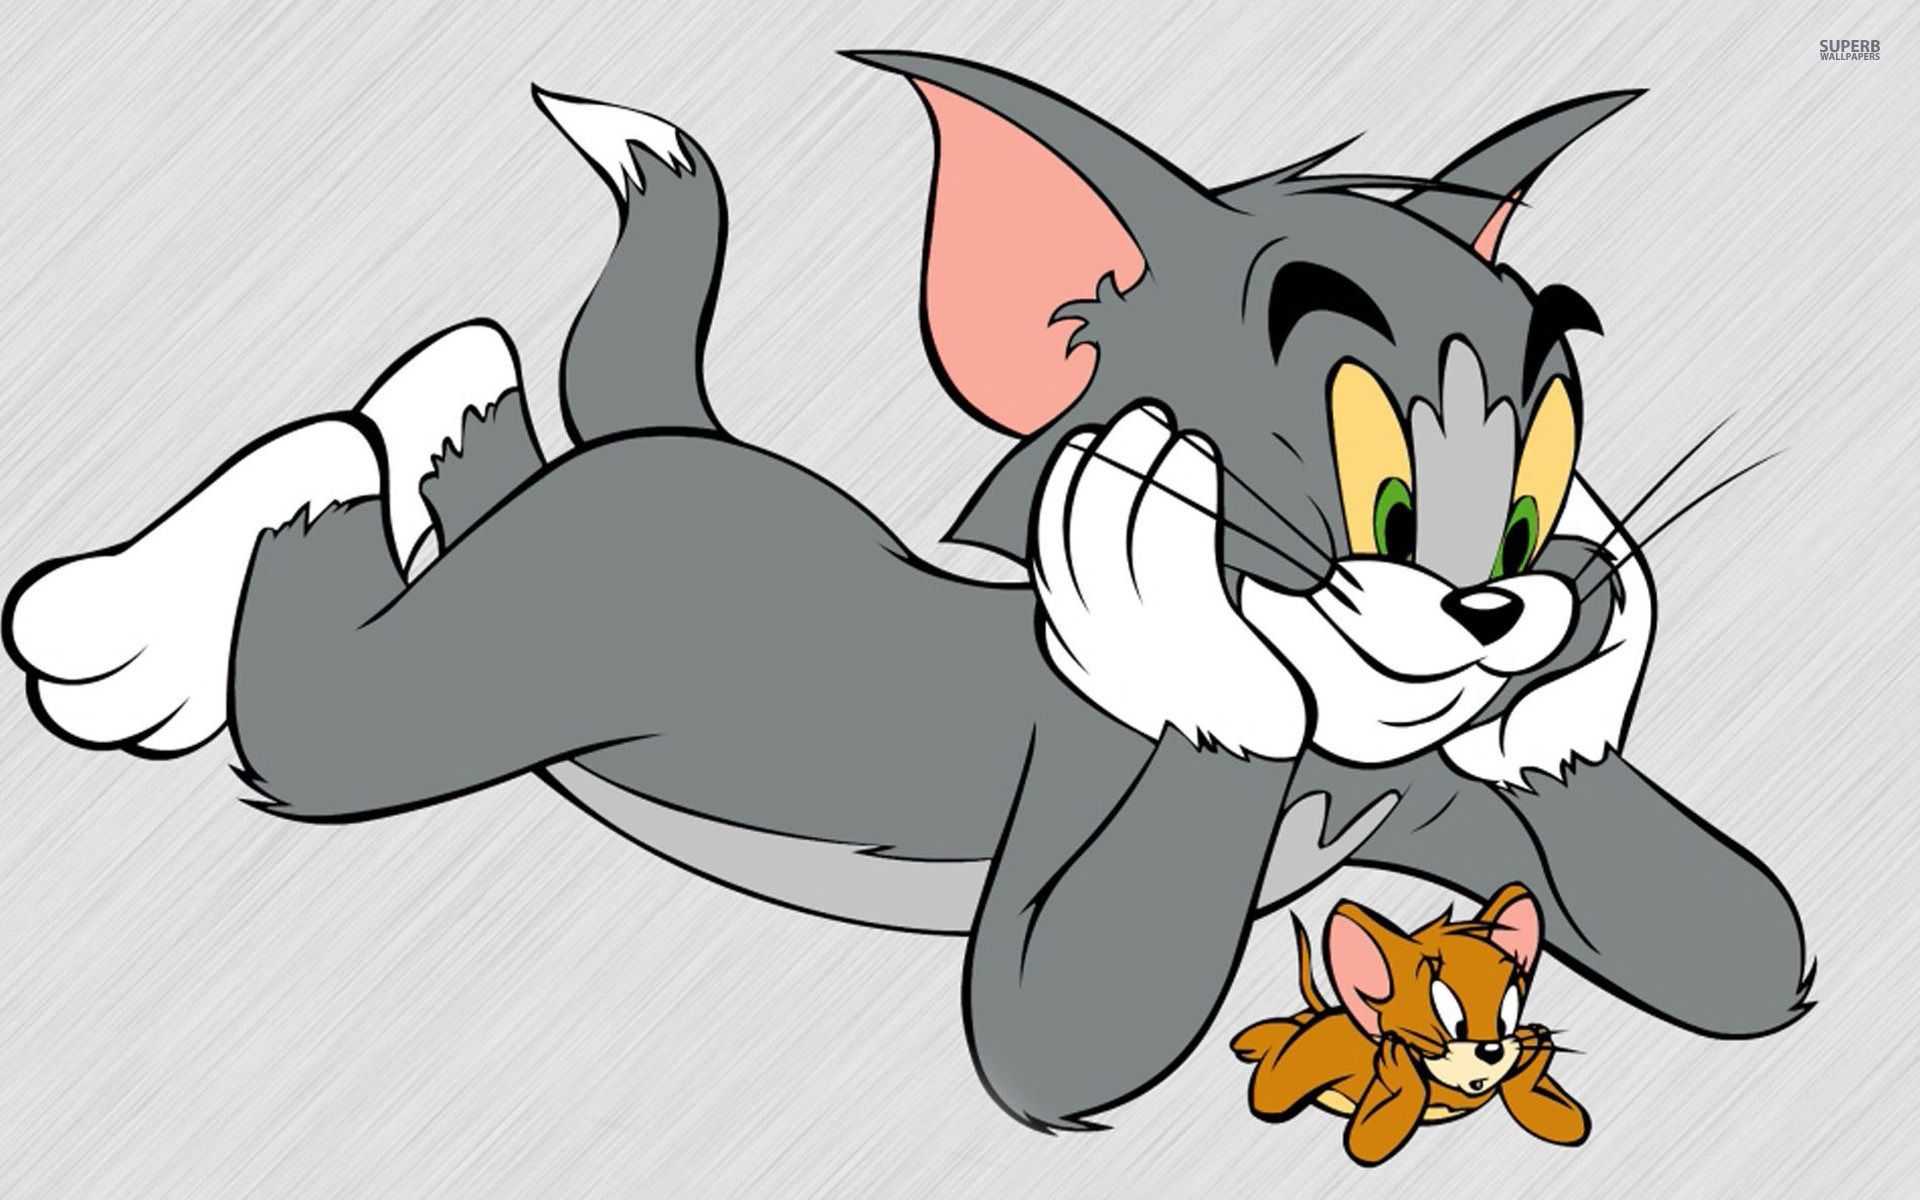 Tom and Jerry 3D Wallpaper